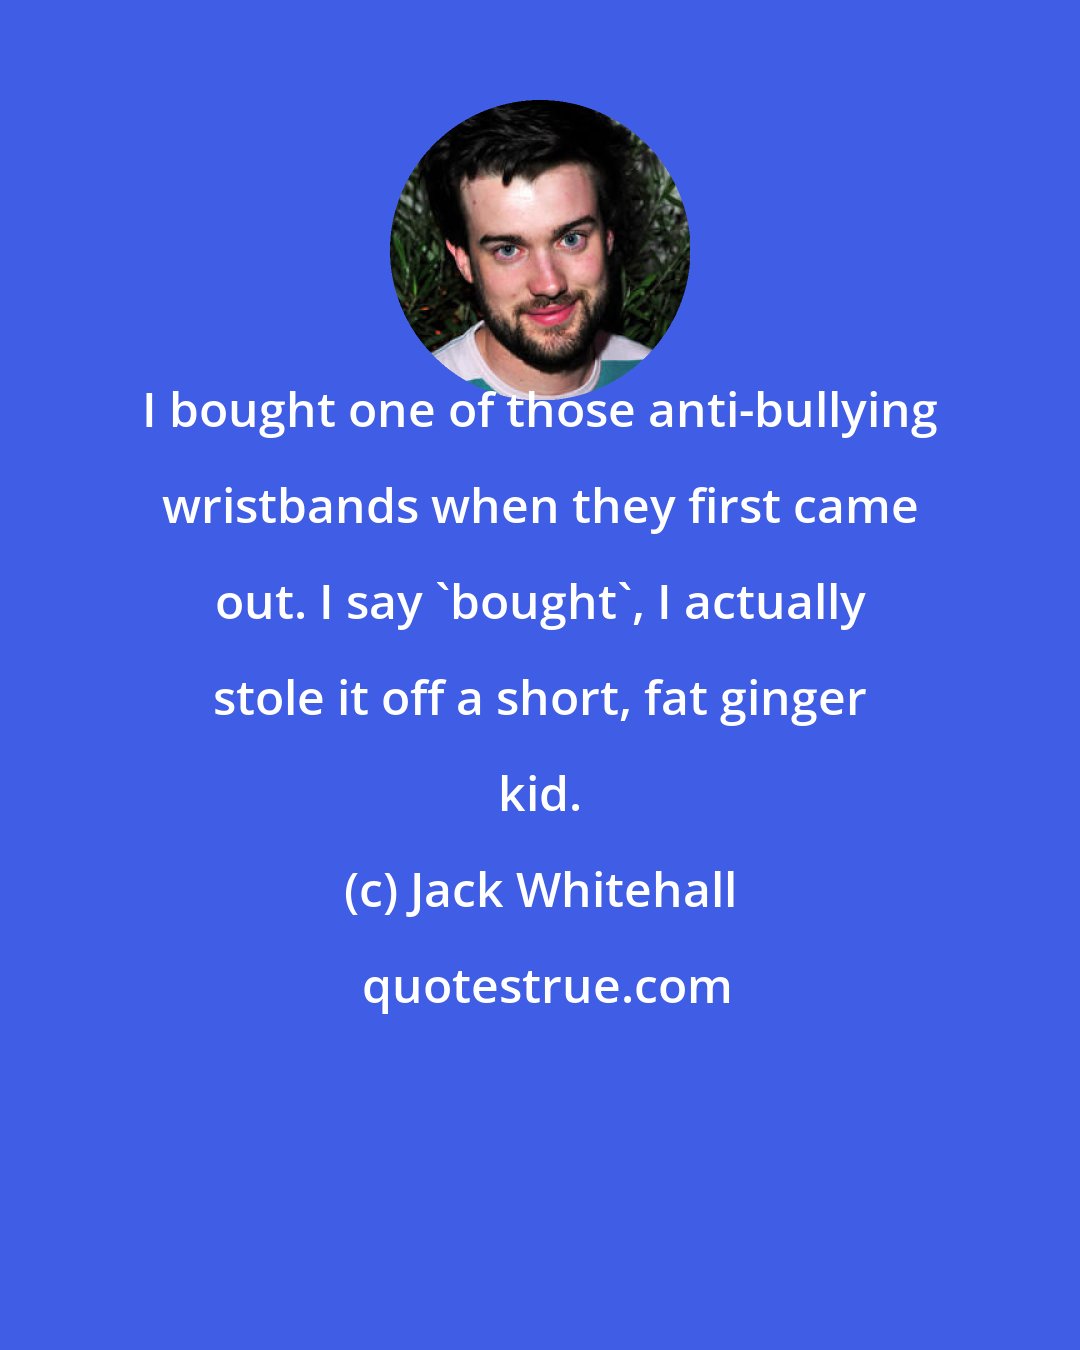 Jack Whitehall: I bought one of those anti-bullying wristbands when they first came out. I say 'bought', I actually stole it off a short, fat ginger kid.